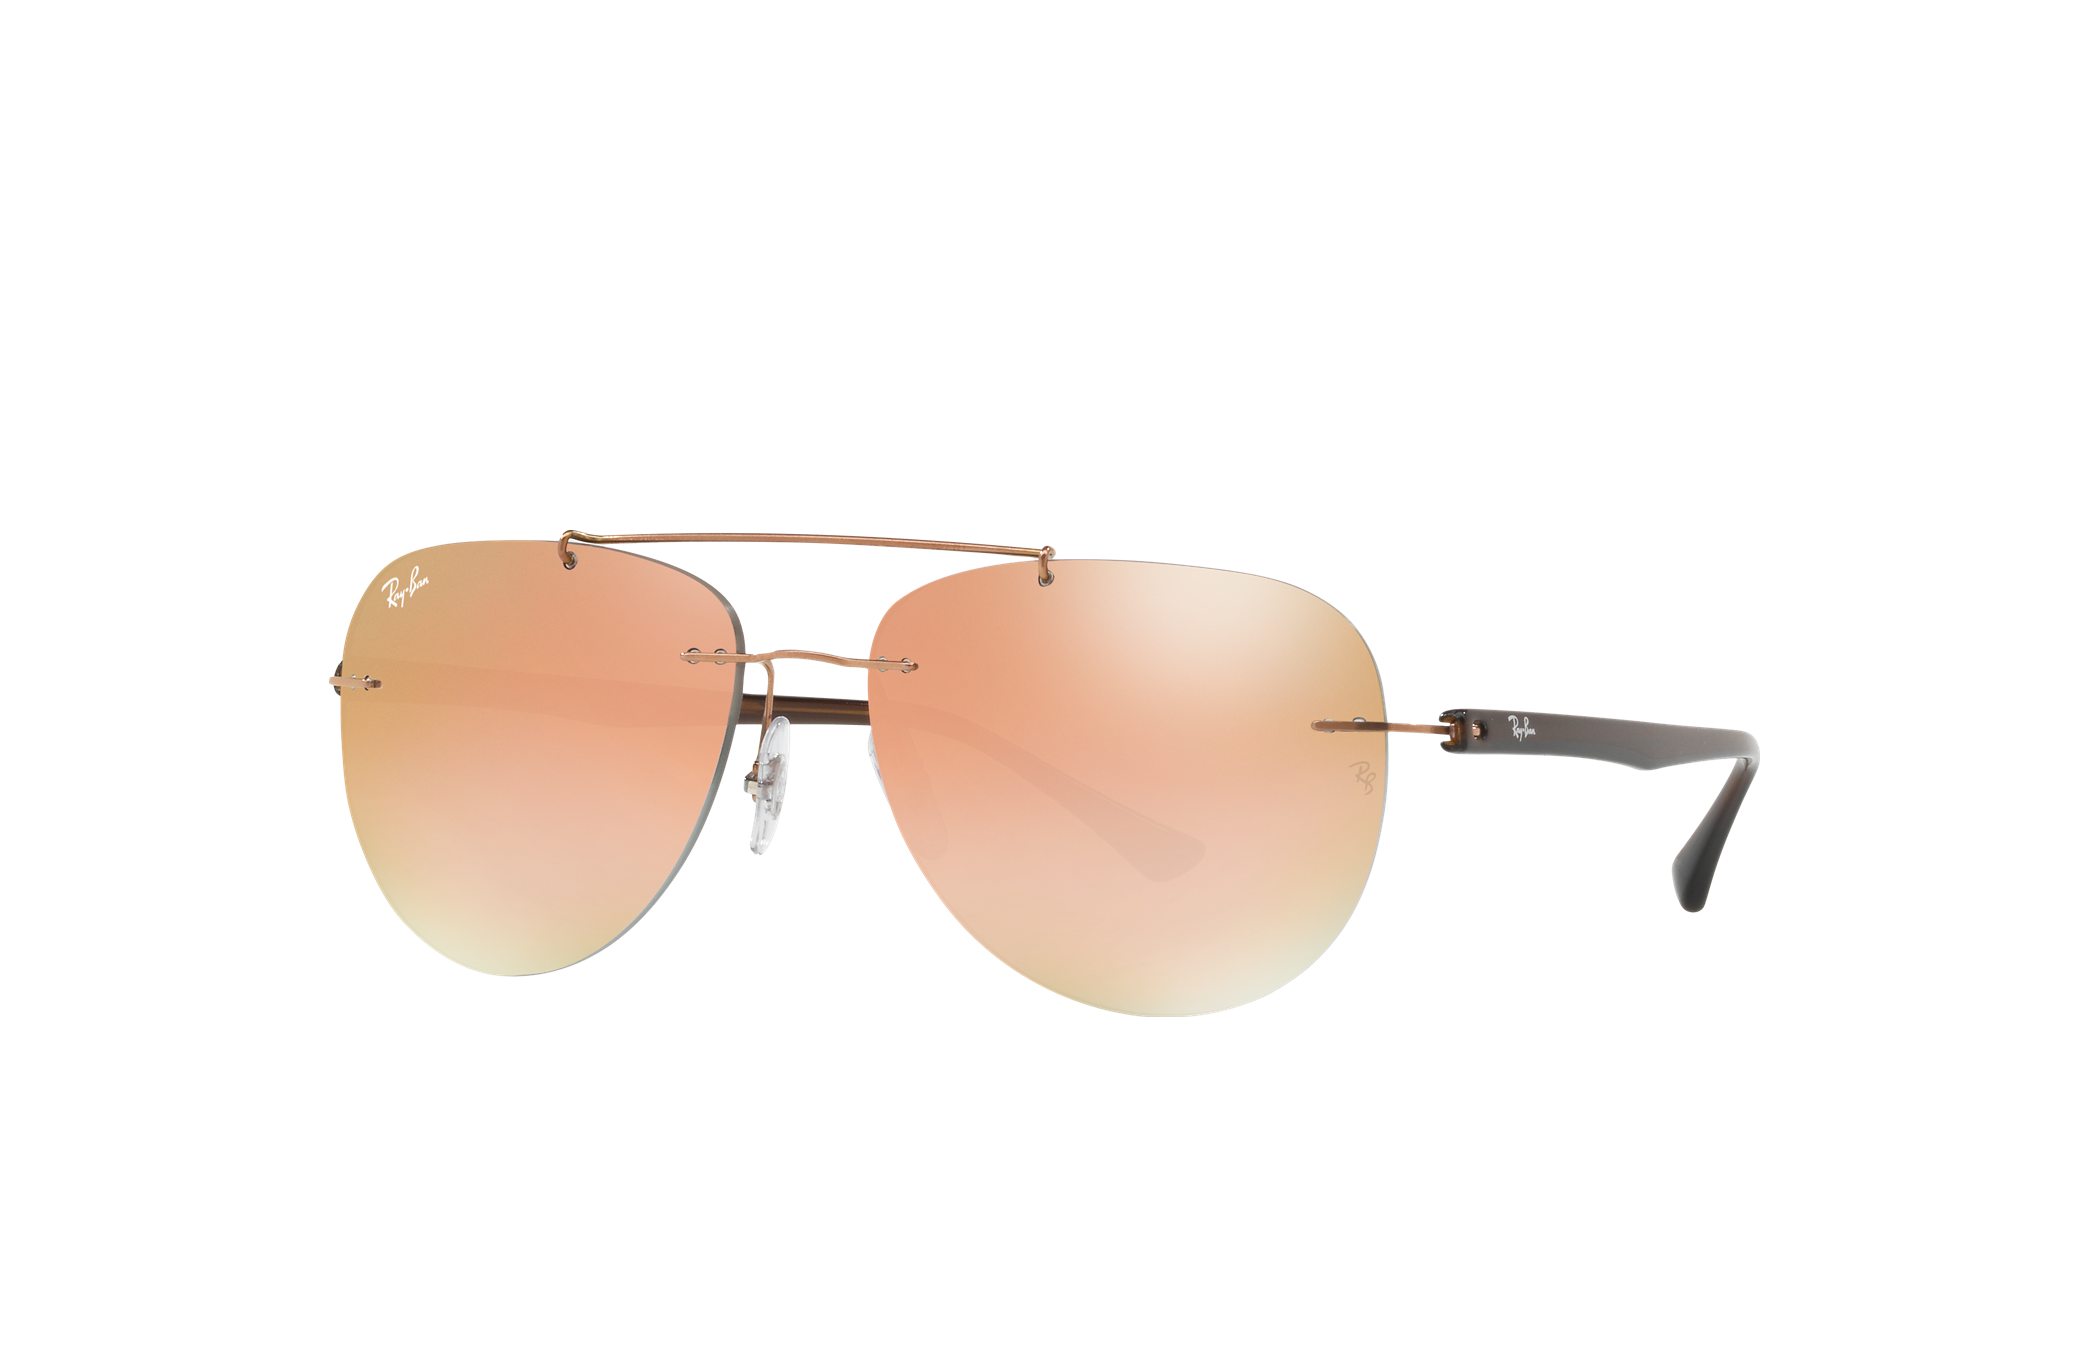 Rb8059 Sunglasses in Bronze-Copper and Pink | Ray-Ban®